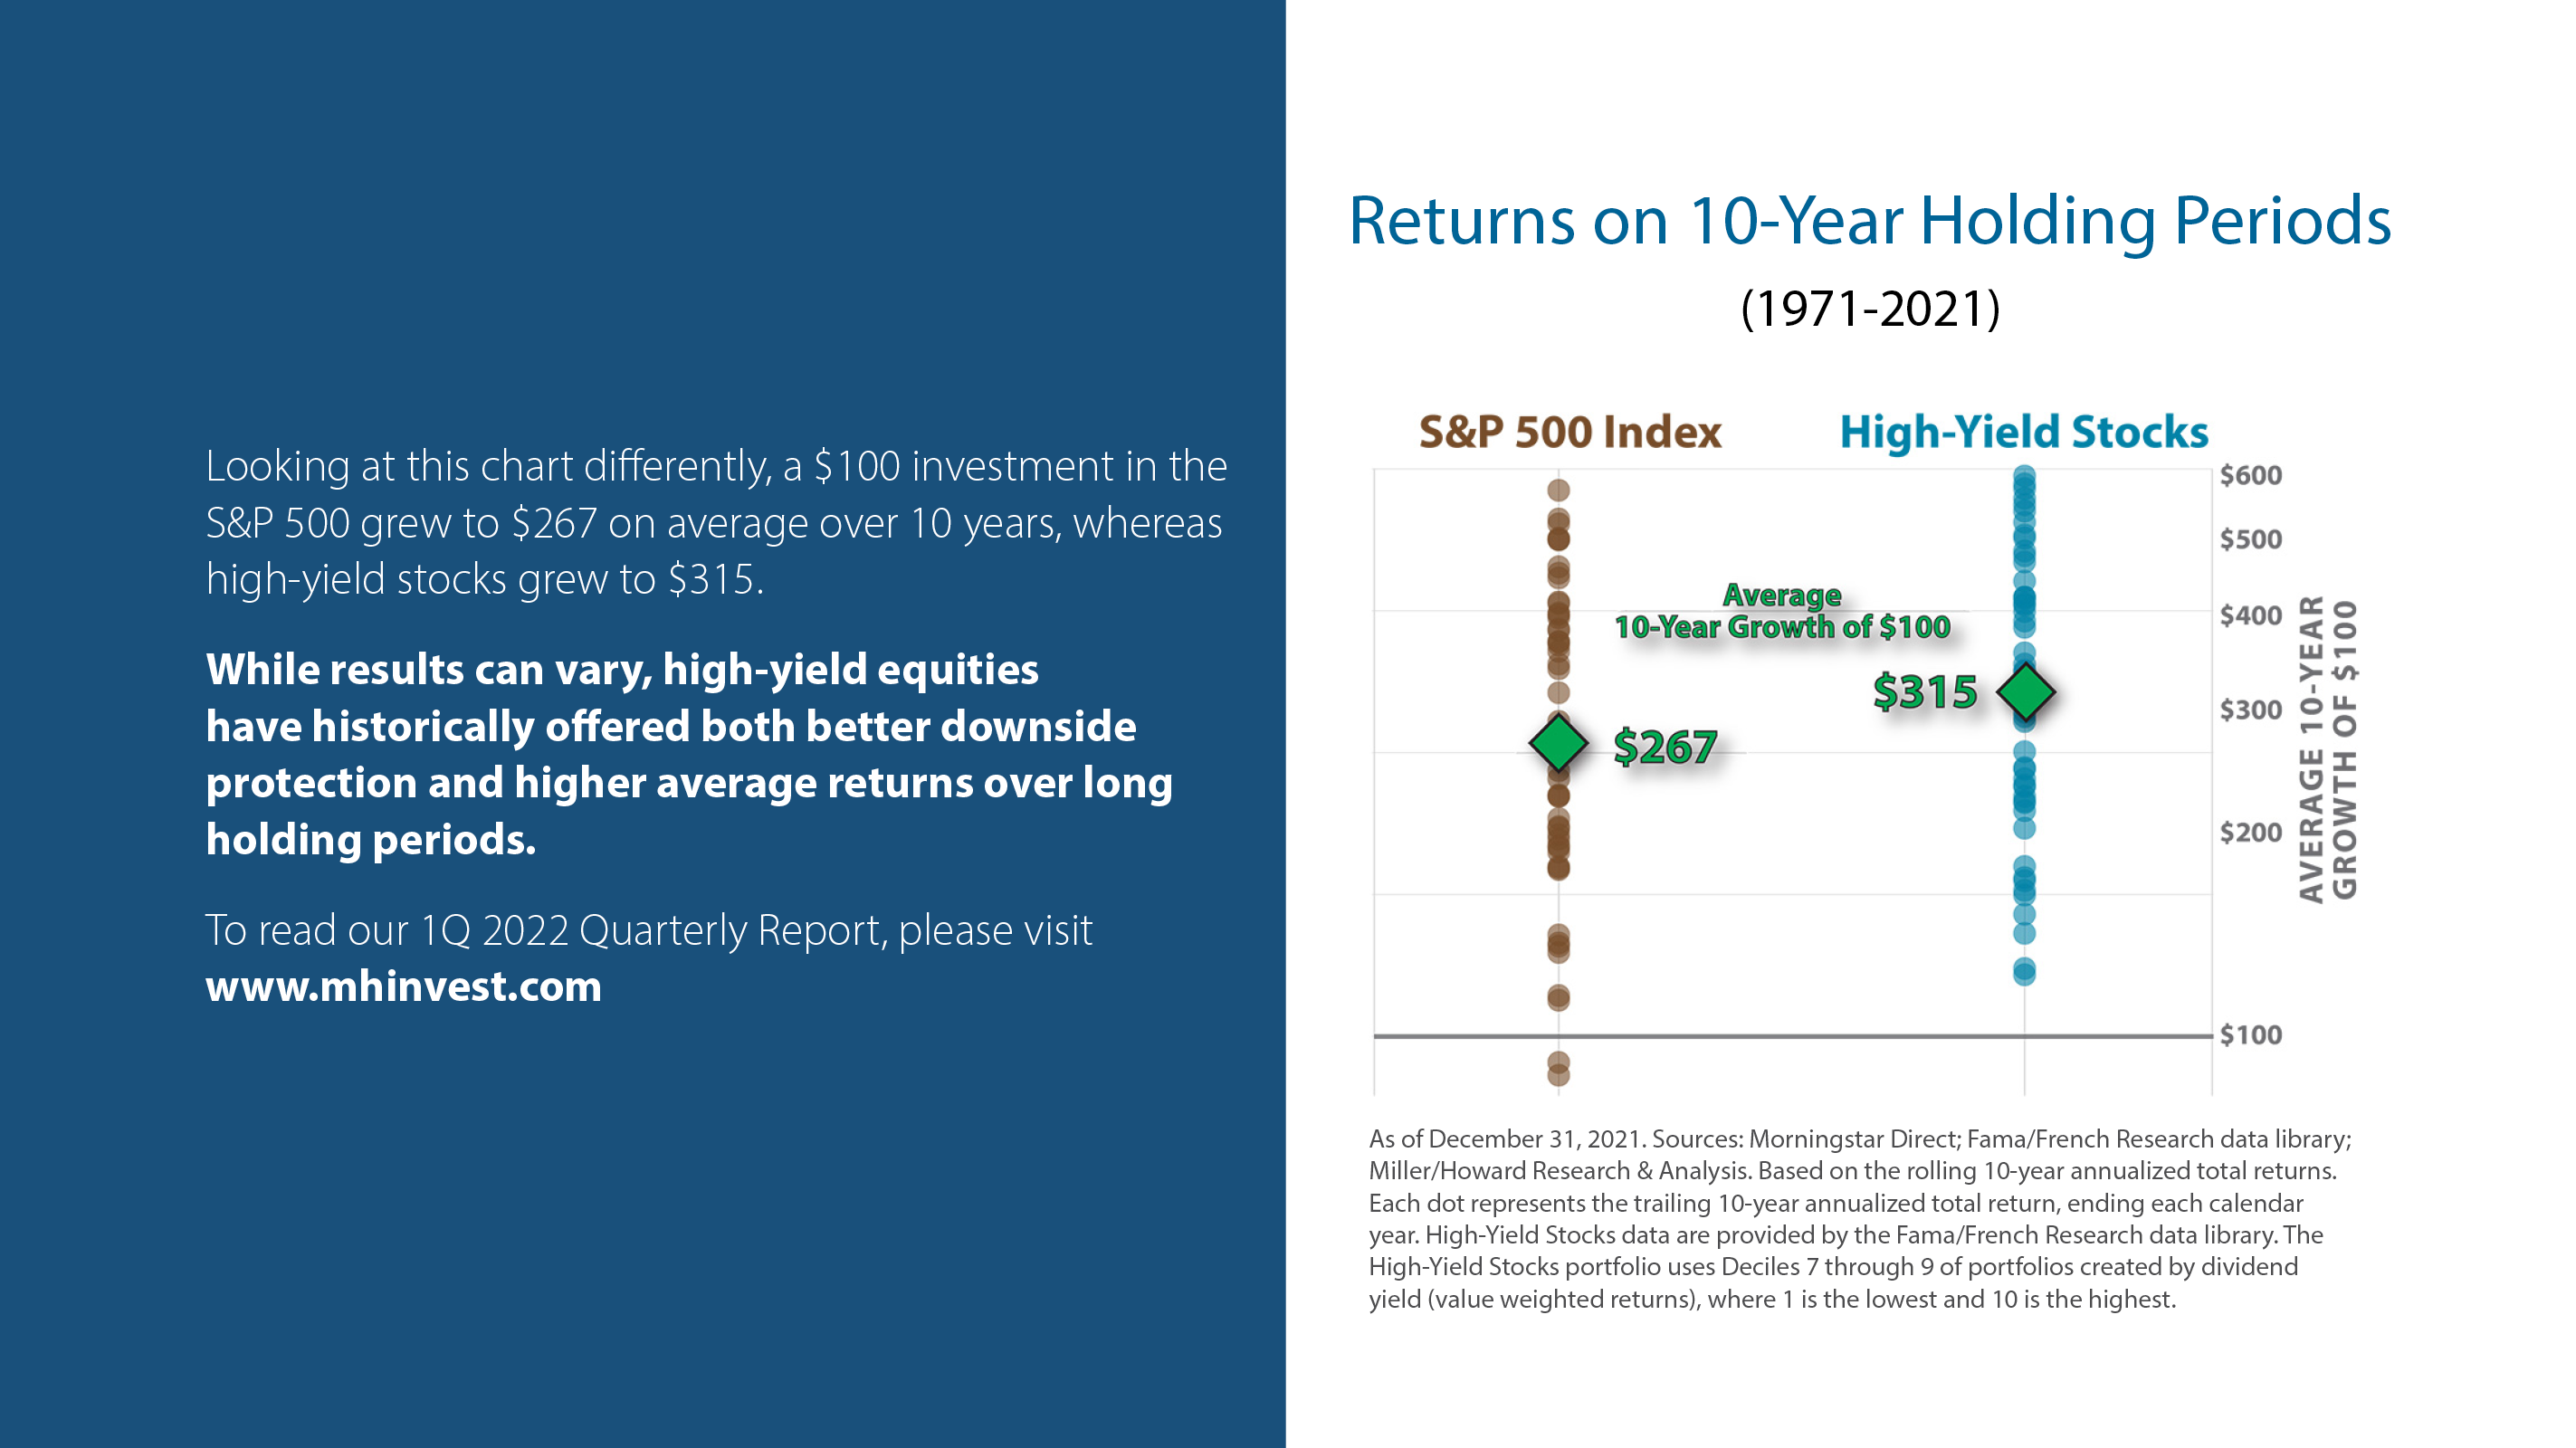 High-yield equities have fared better